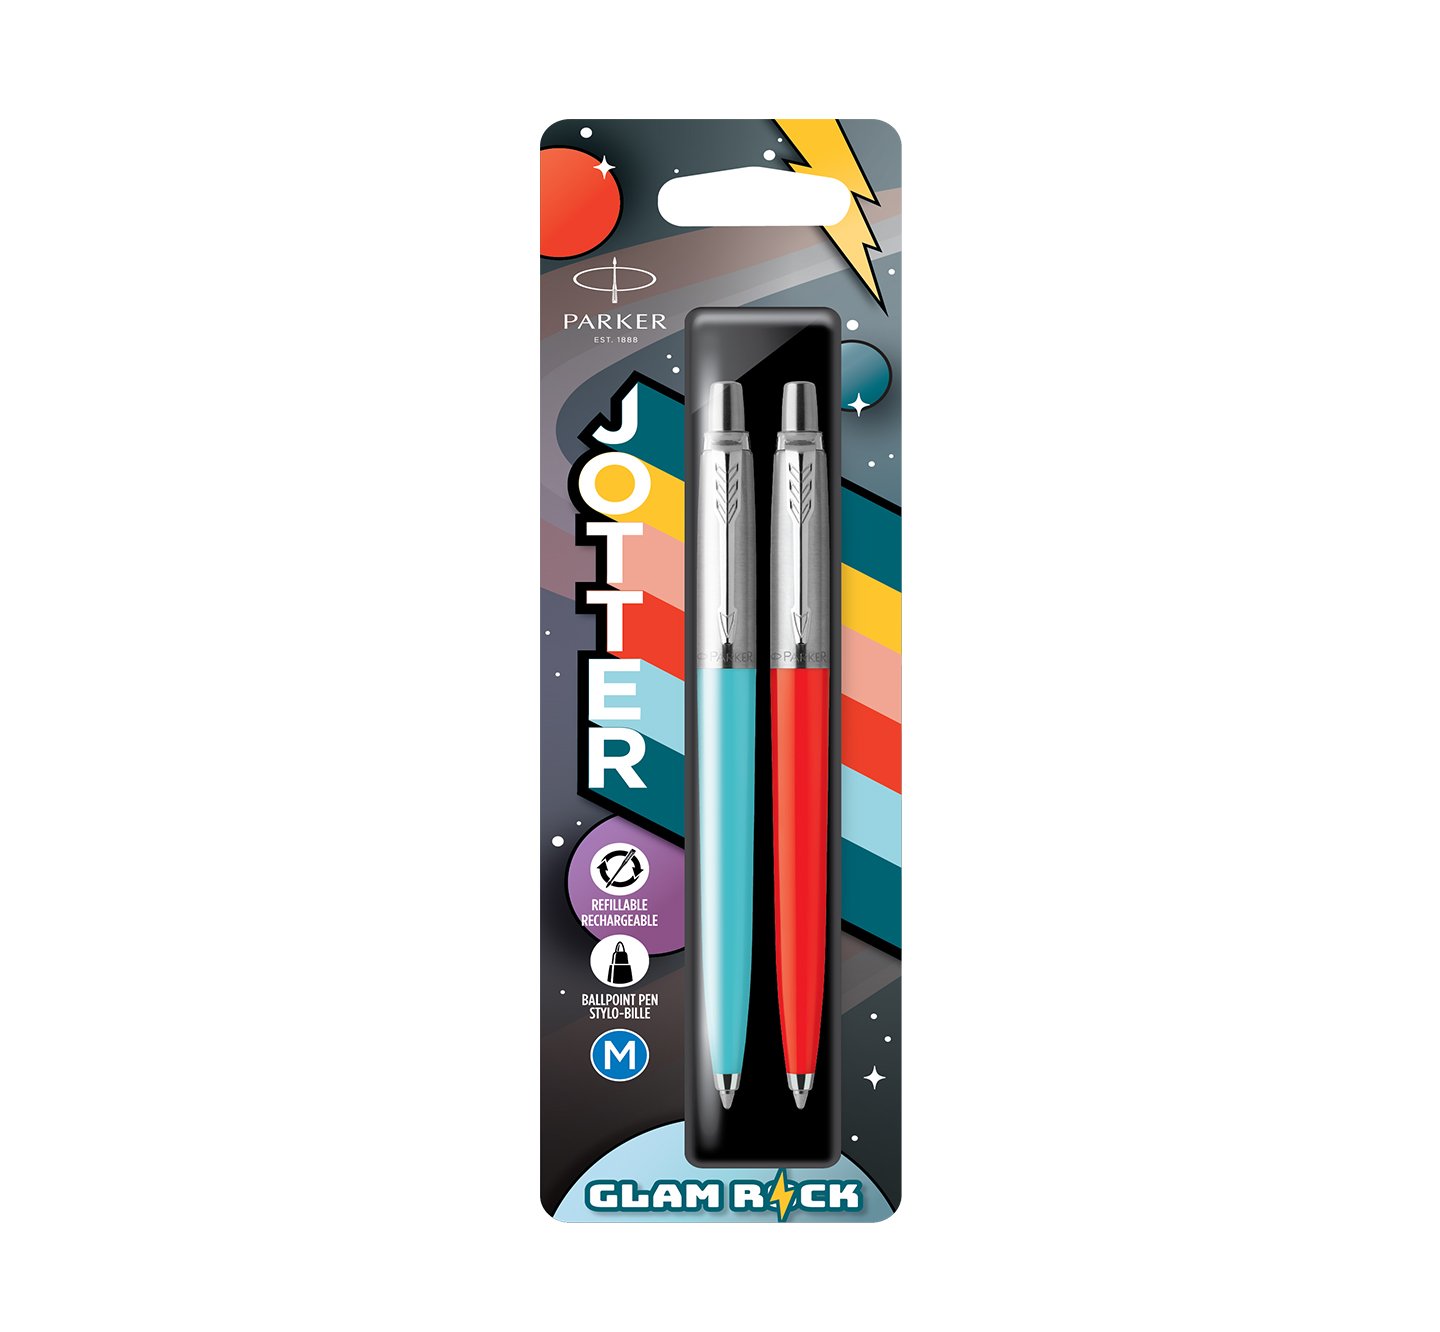 glam rock inspired ball point pens in packaging